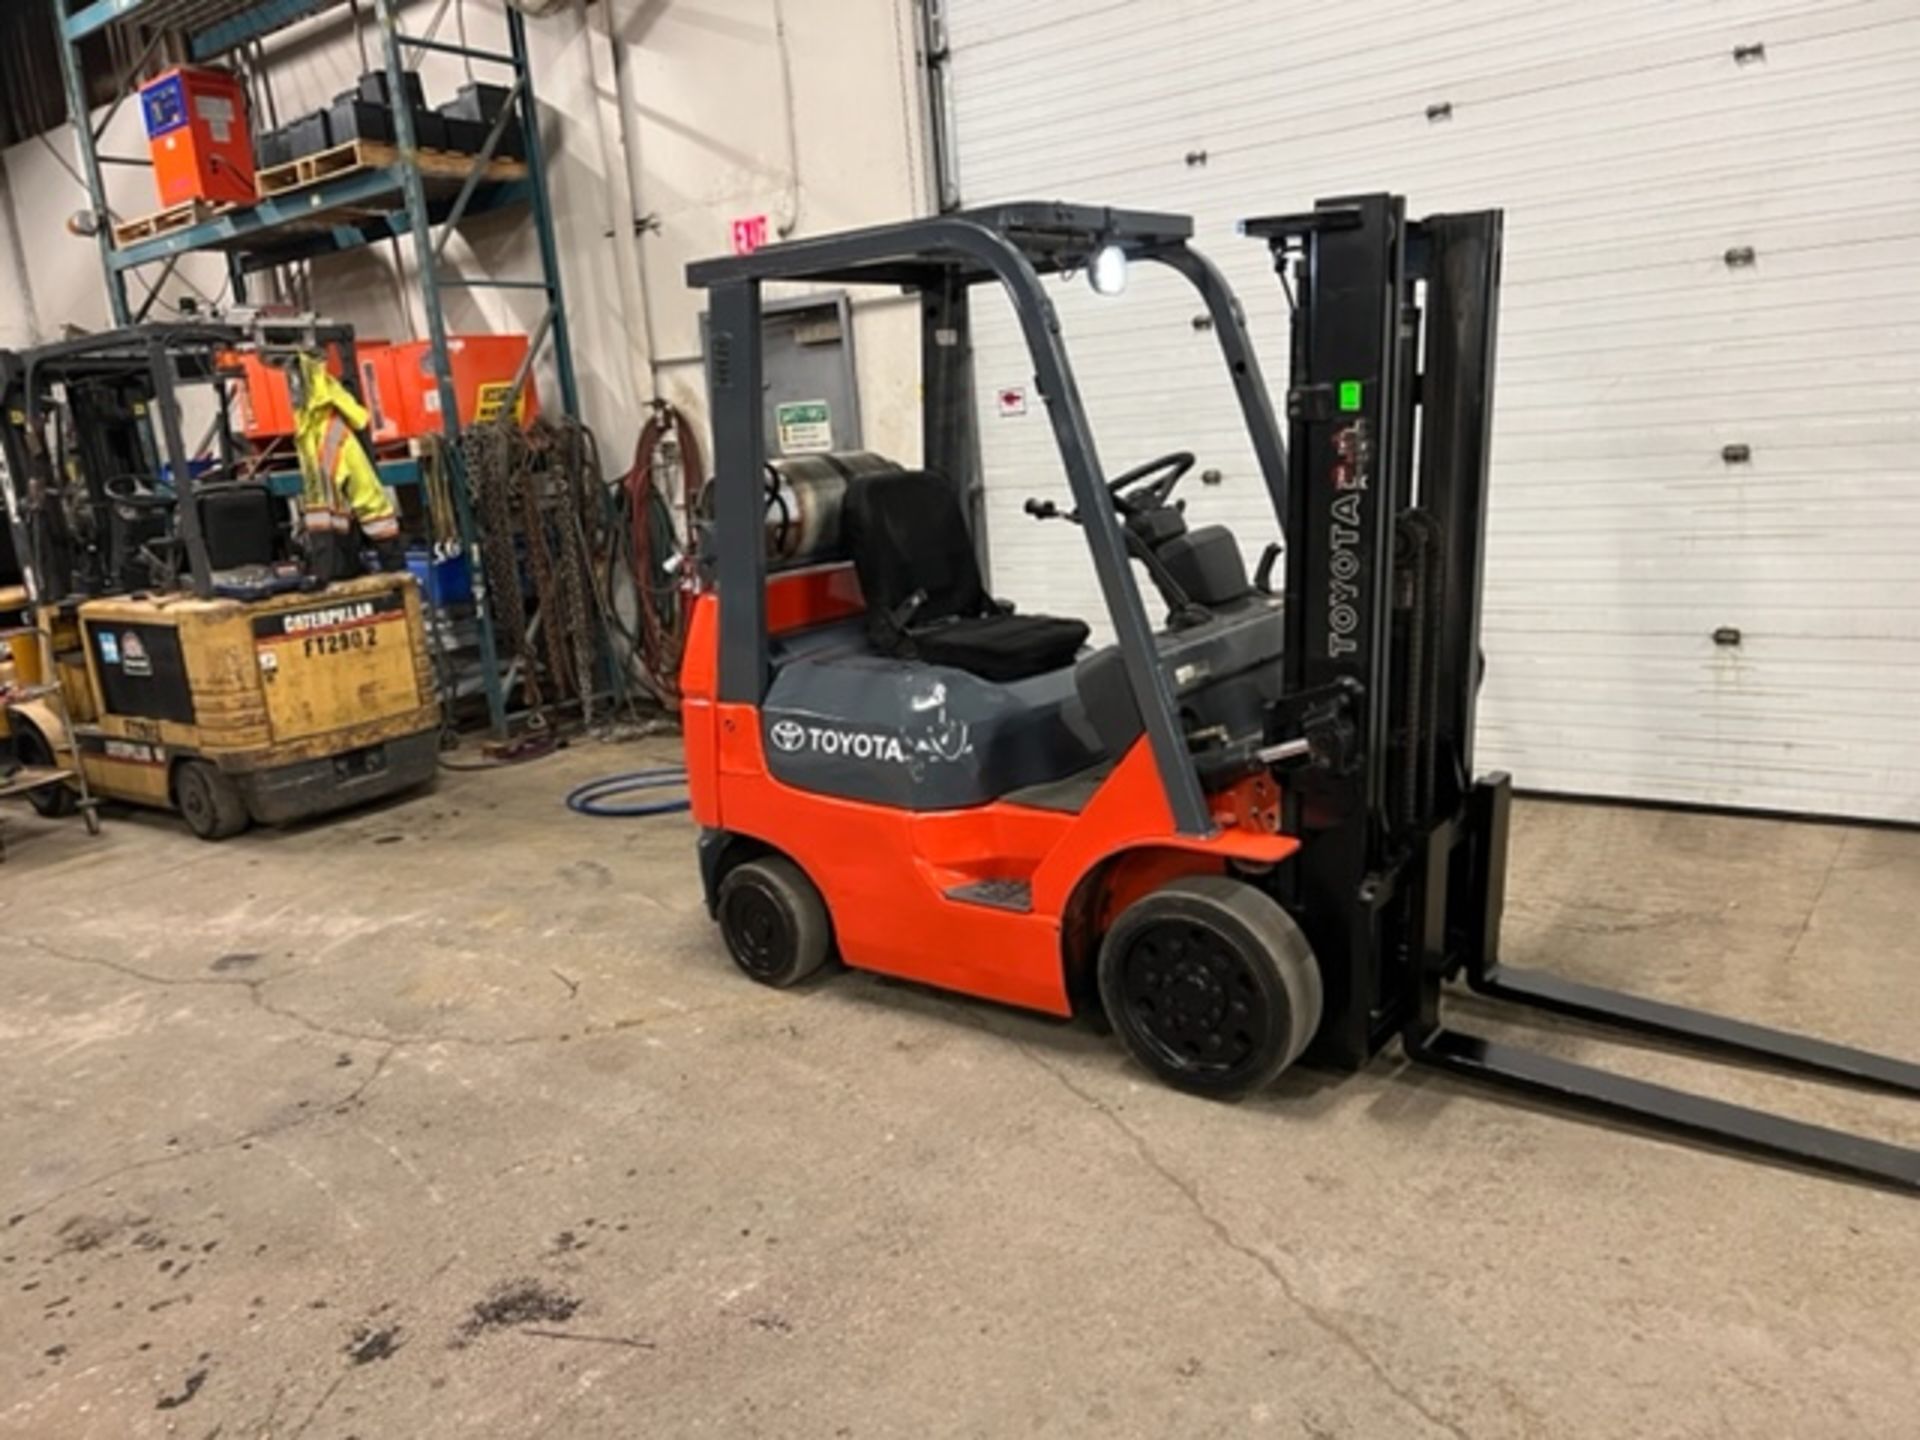 FREE CUSTOMS - Toyota 4,000lbs Capacity Forklift LPG (propane) (no propane tank included) - Image 2 of 3